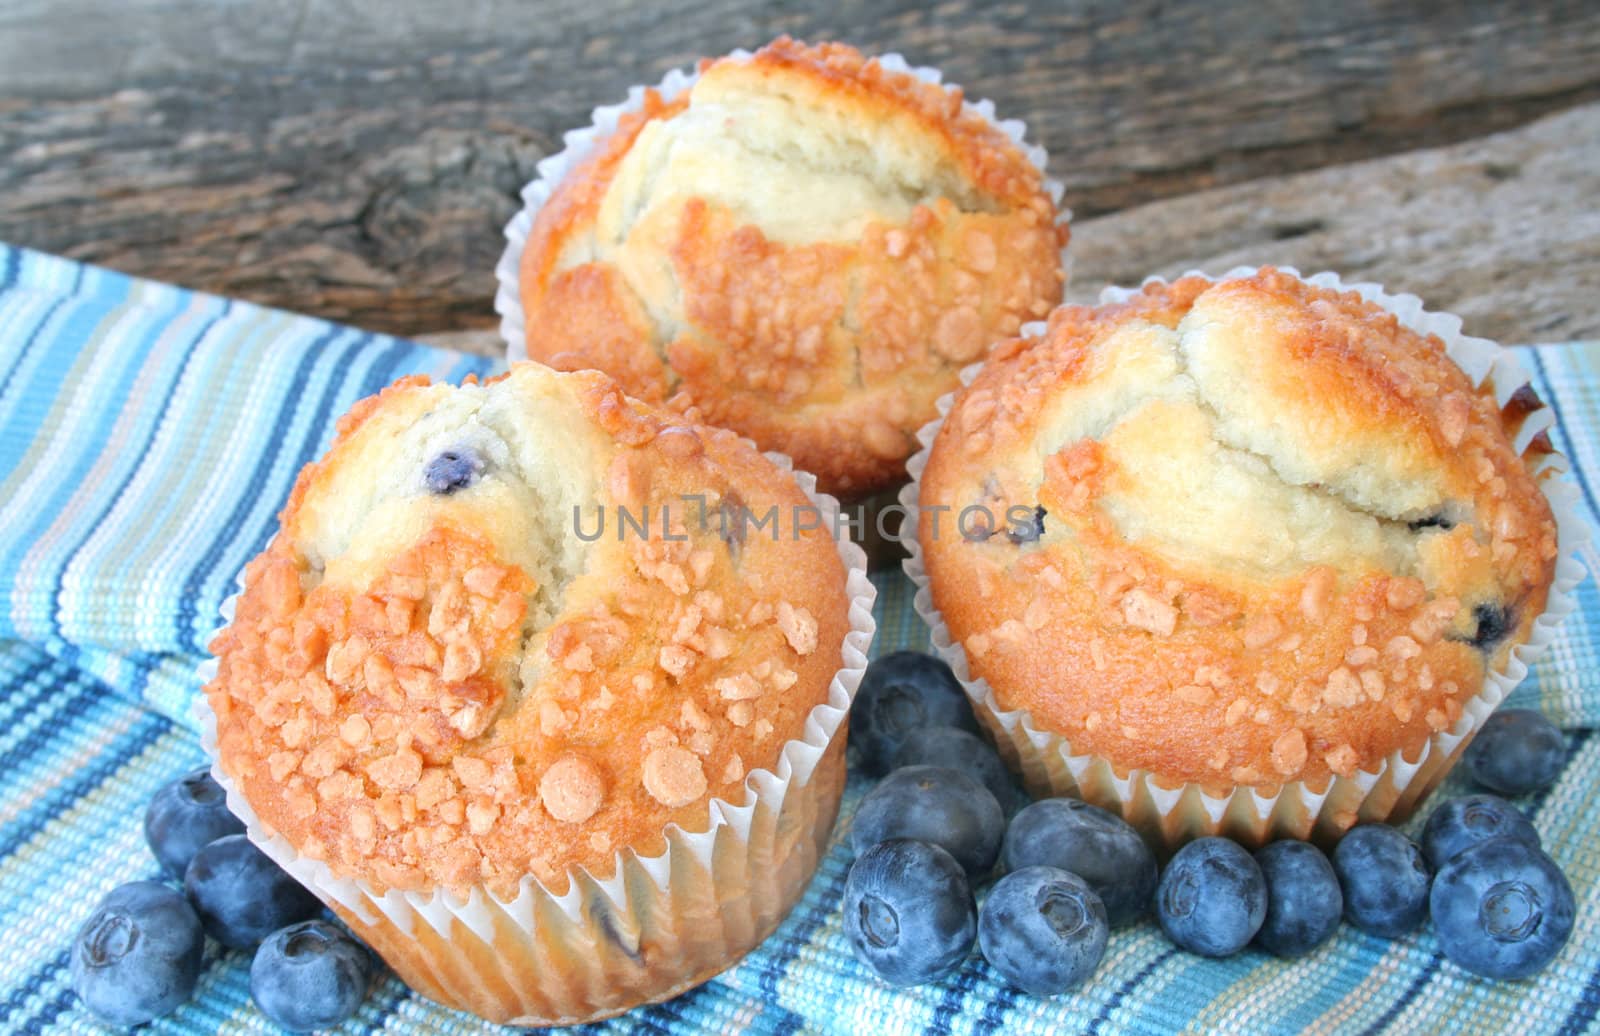 Three blueberry muffins with fresh blueberries.